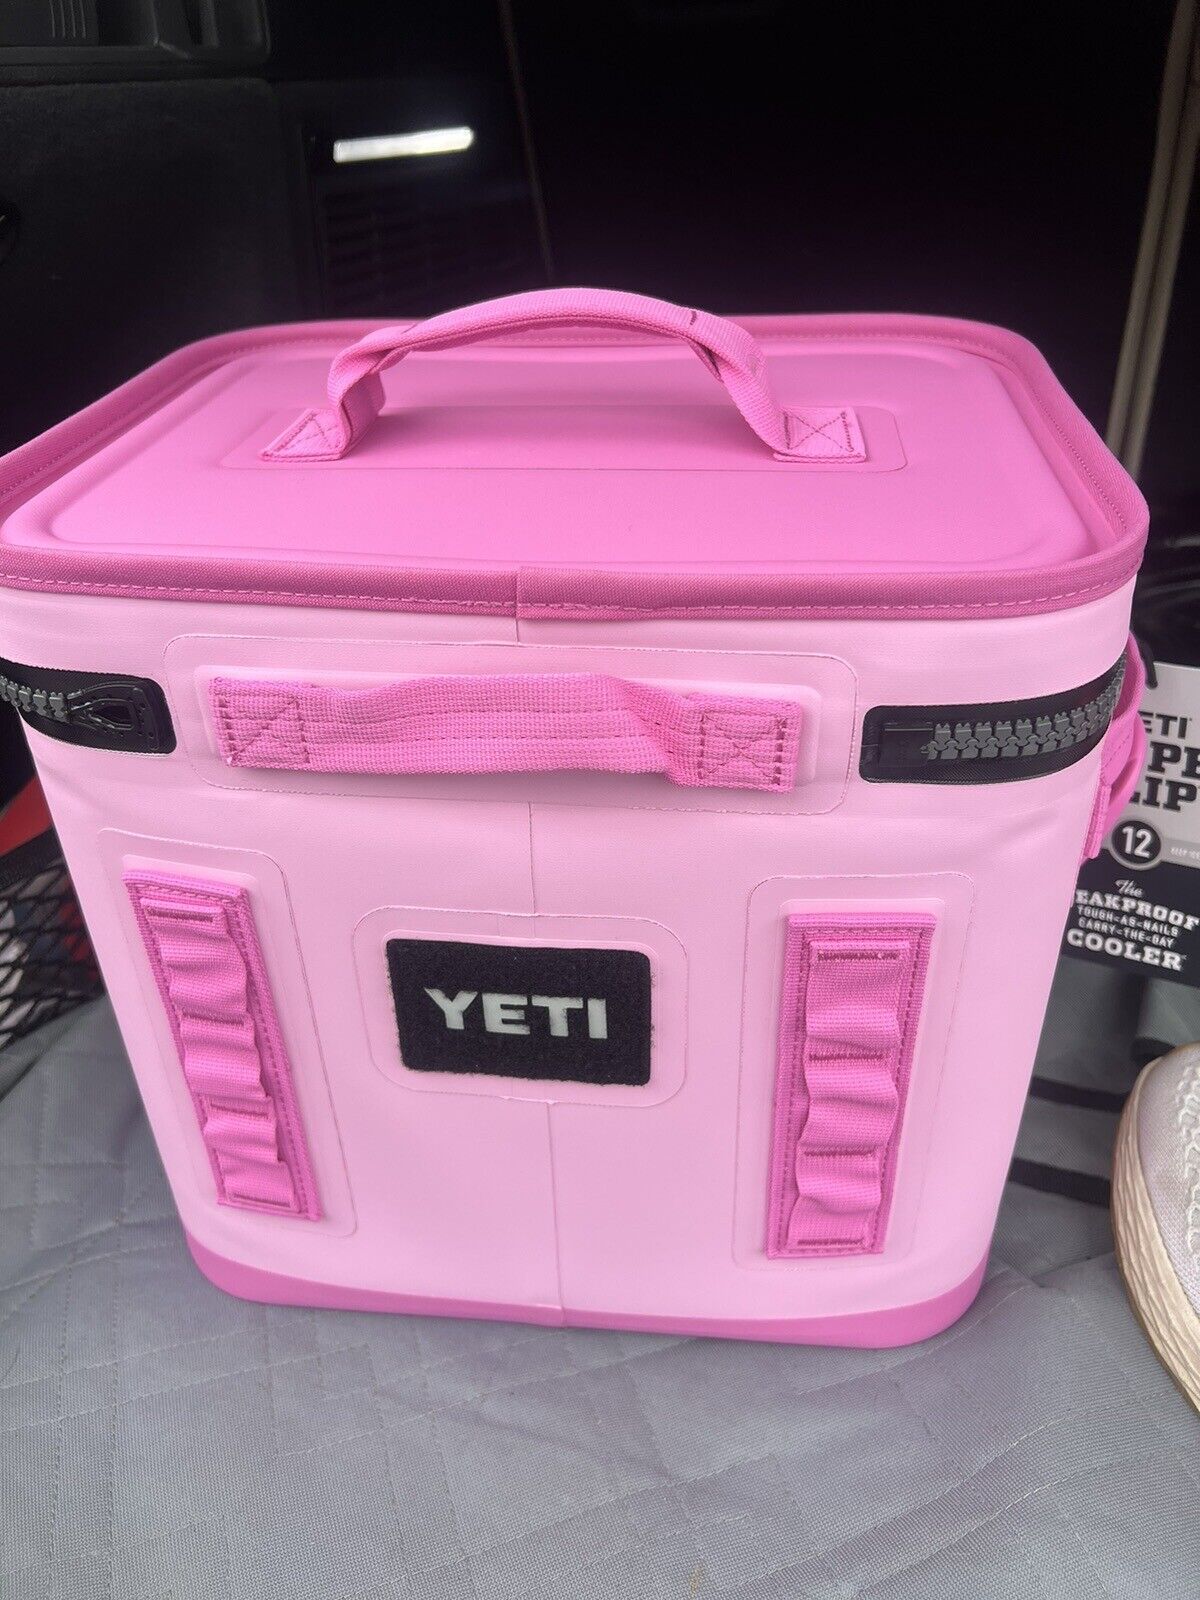 YETI Hopper Flip 12 Soft Cooler Cosmic Lilac – Occasionally Yours